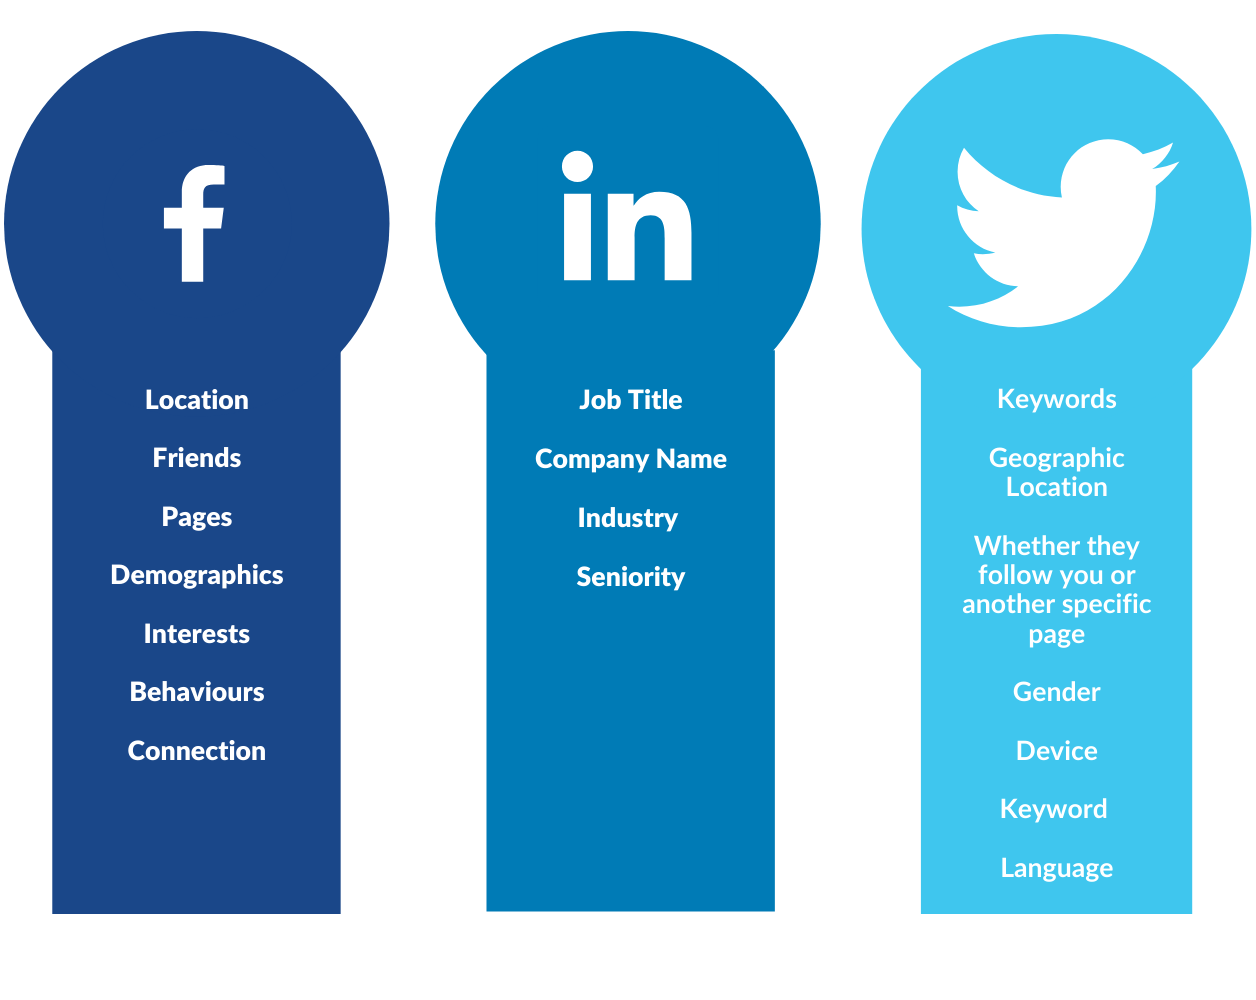 The different attributes available for facebook, Linkedin and Twitter